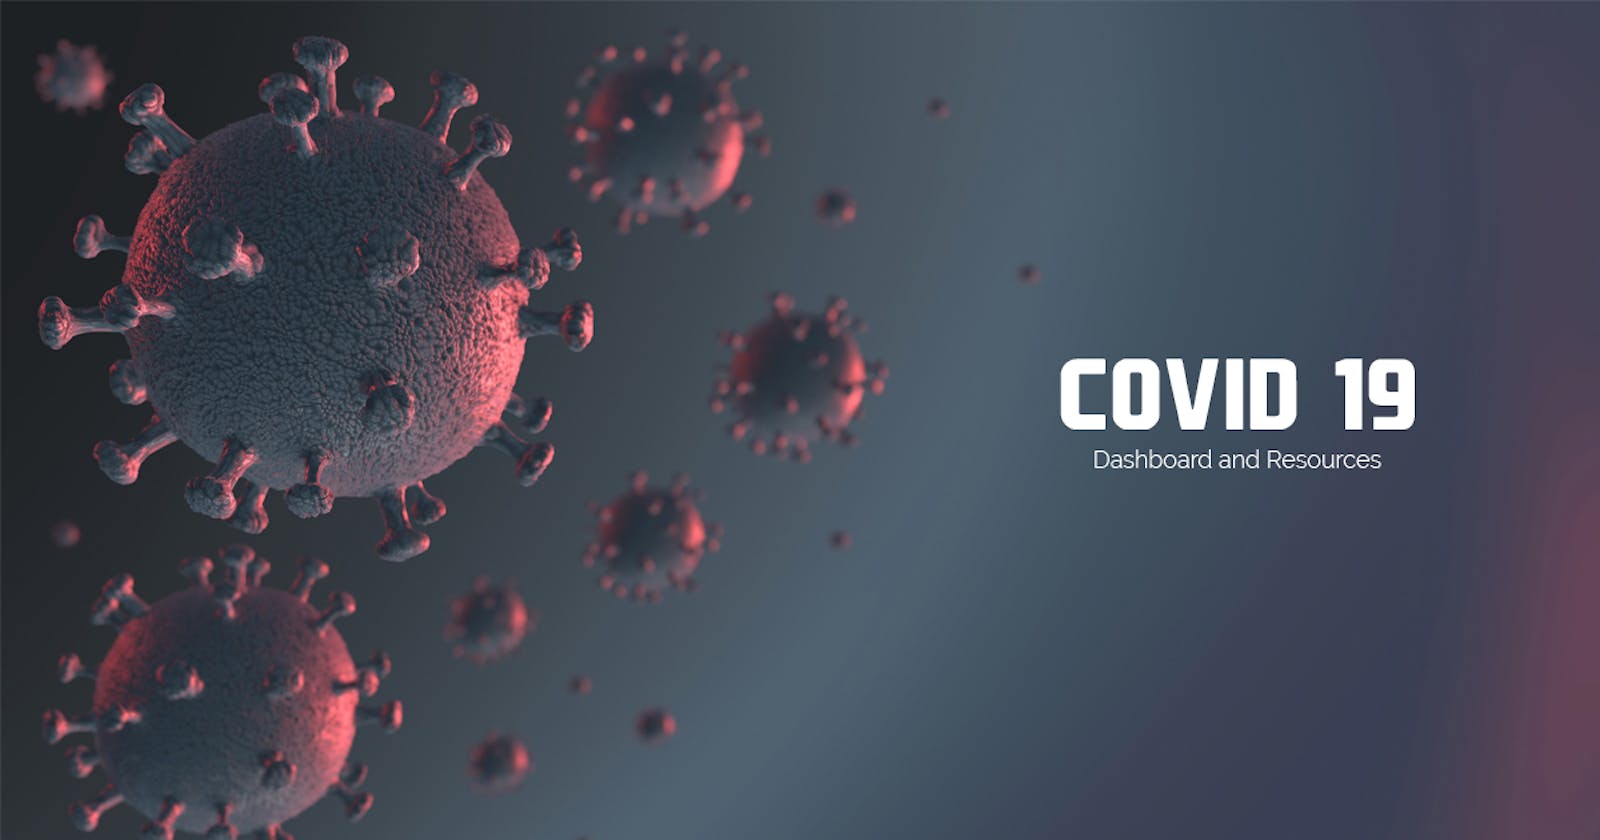 COVID-19 - Curated list of Resources, Dashboards, Data and Projects about Coronavirus